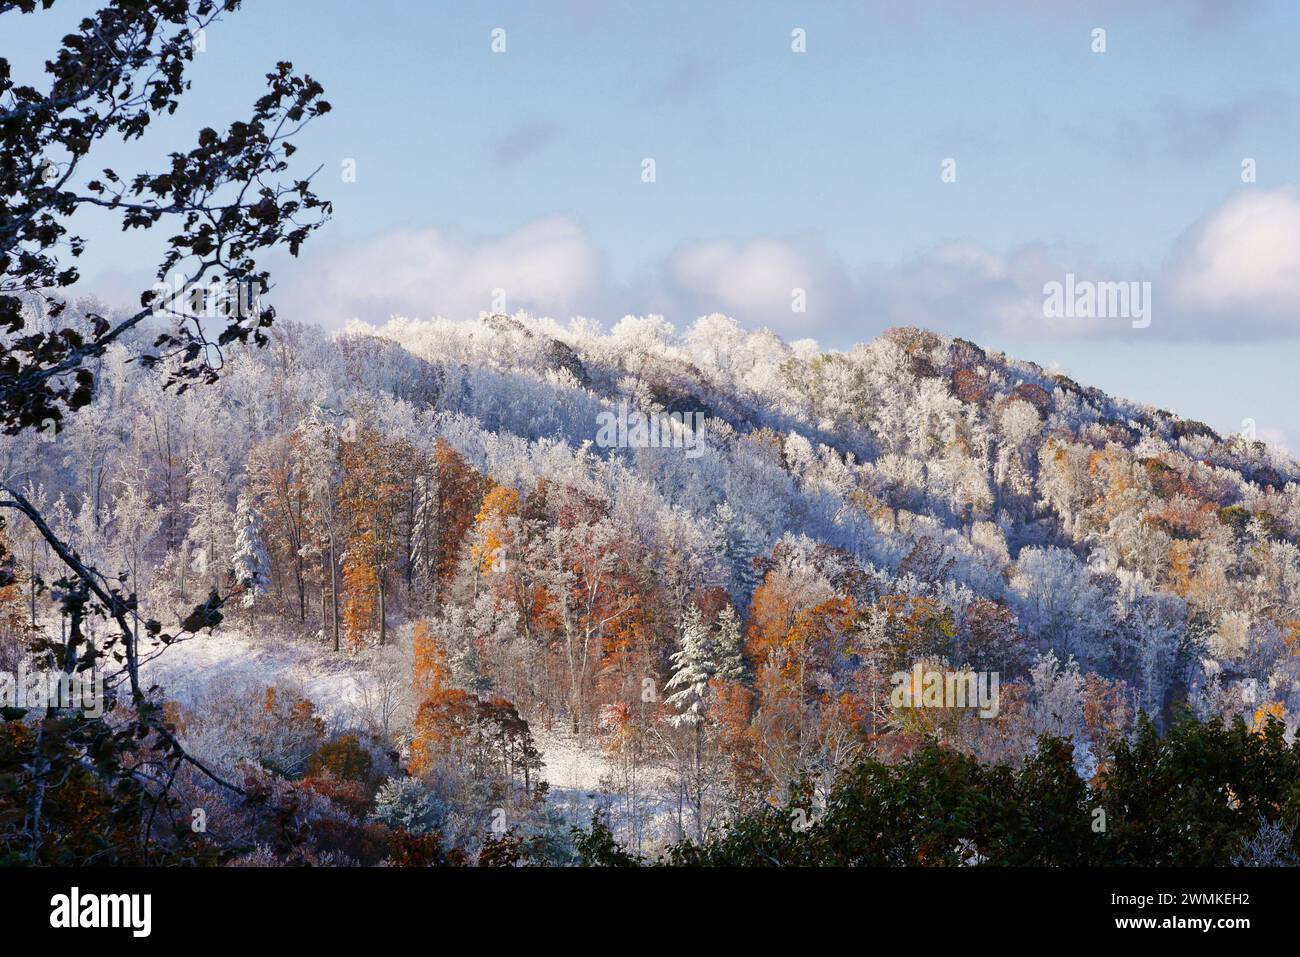 Snow covers trees with autumn colors after a rare October snow storm in the Blue Ridge mountains Stock Photo